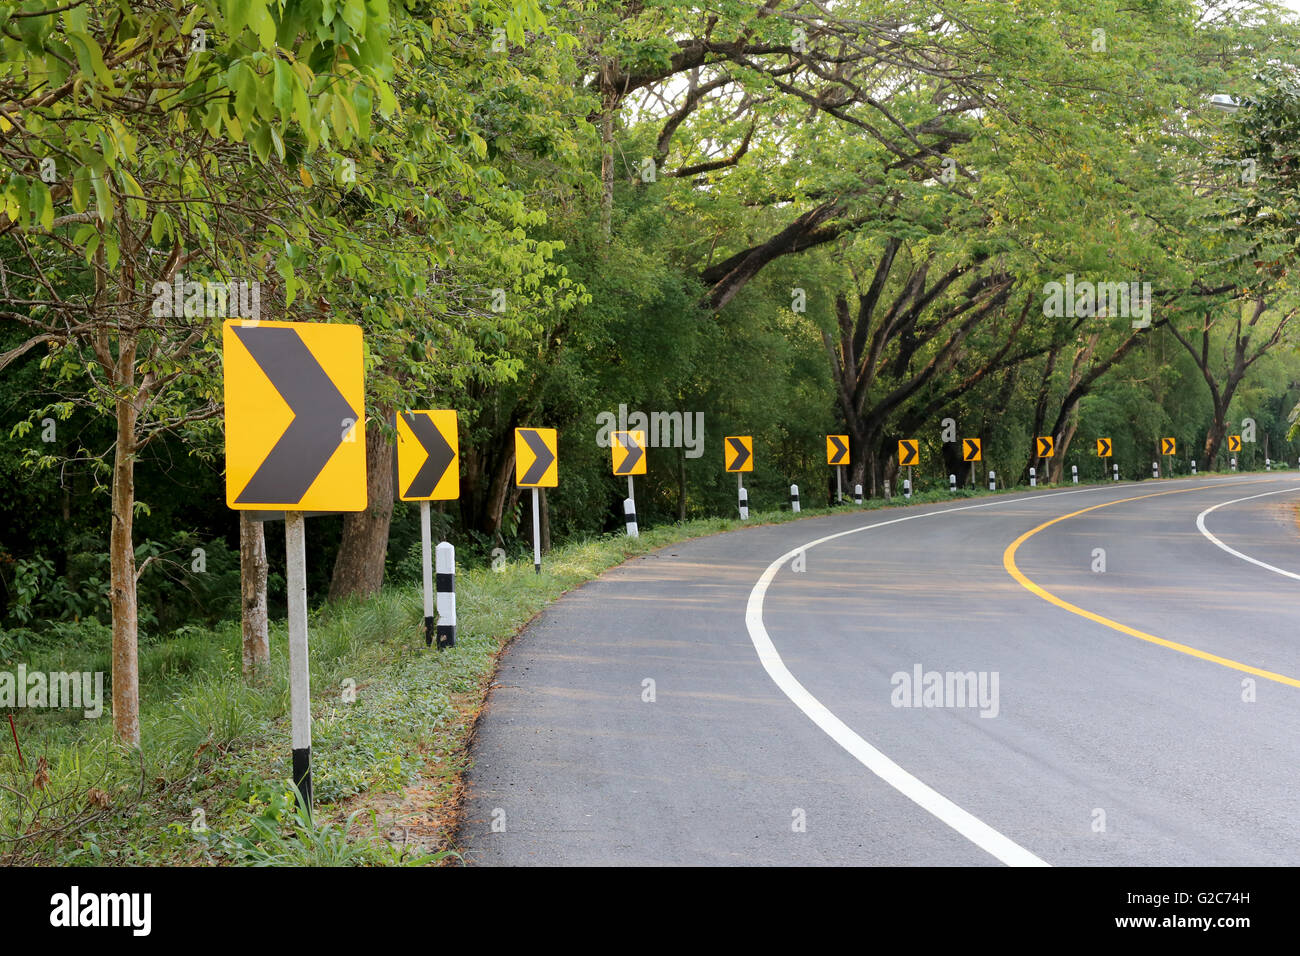 The road curve with street signs reflex light,At night you can see the signs more clearly. Stock Photo